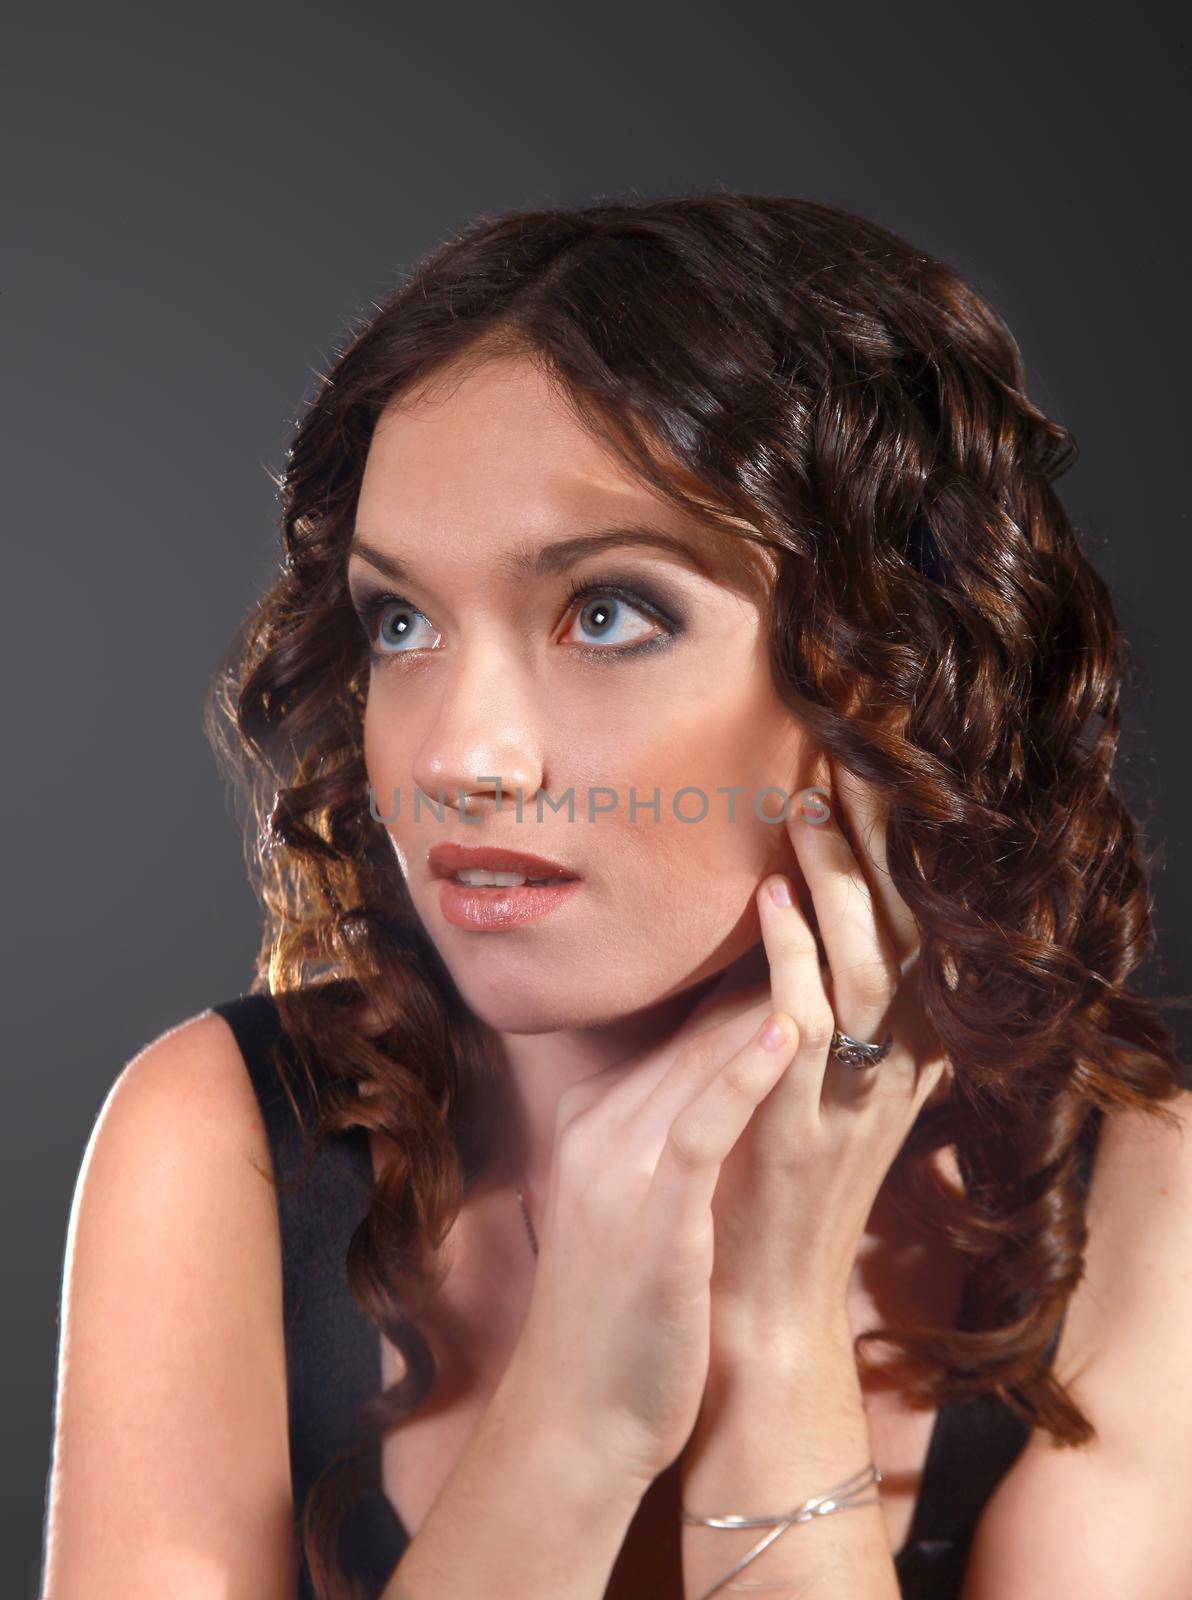 The beautiful young sexual woman on a dark background